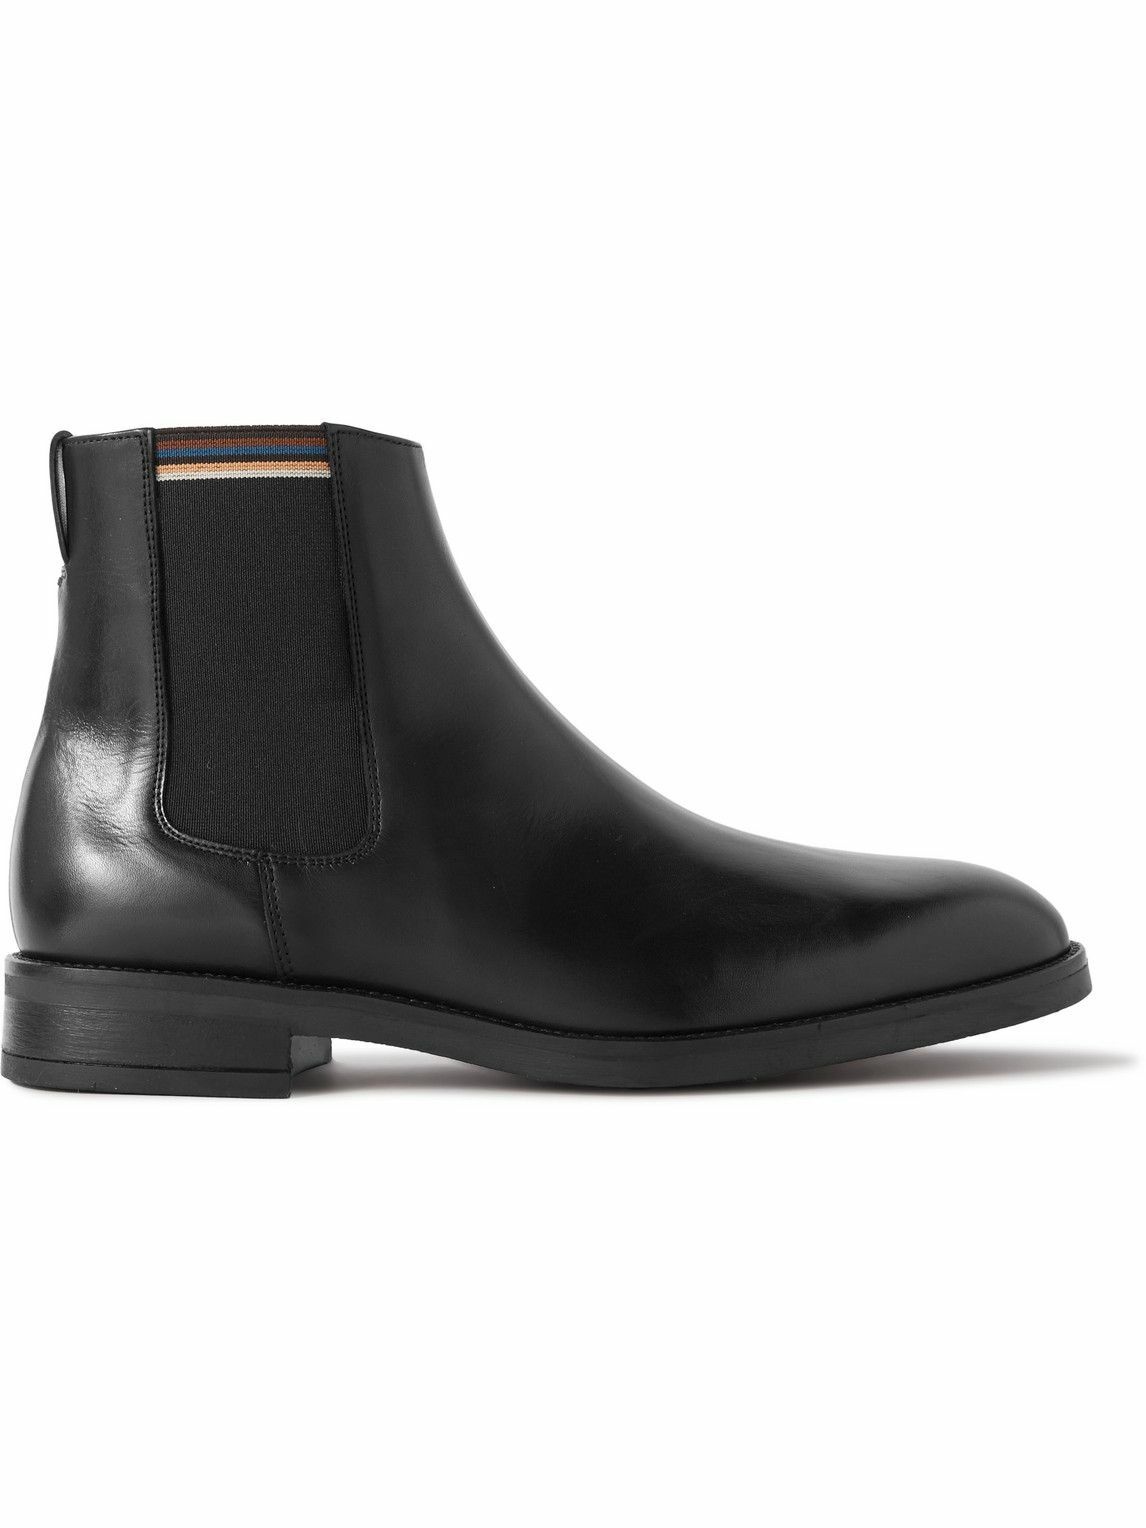 Photo: Paul Smith - Leather Chelsea Boots - Black